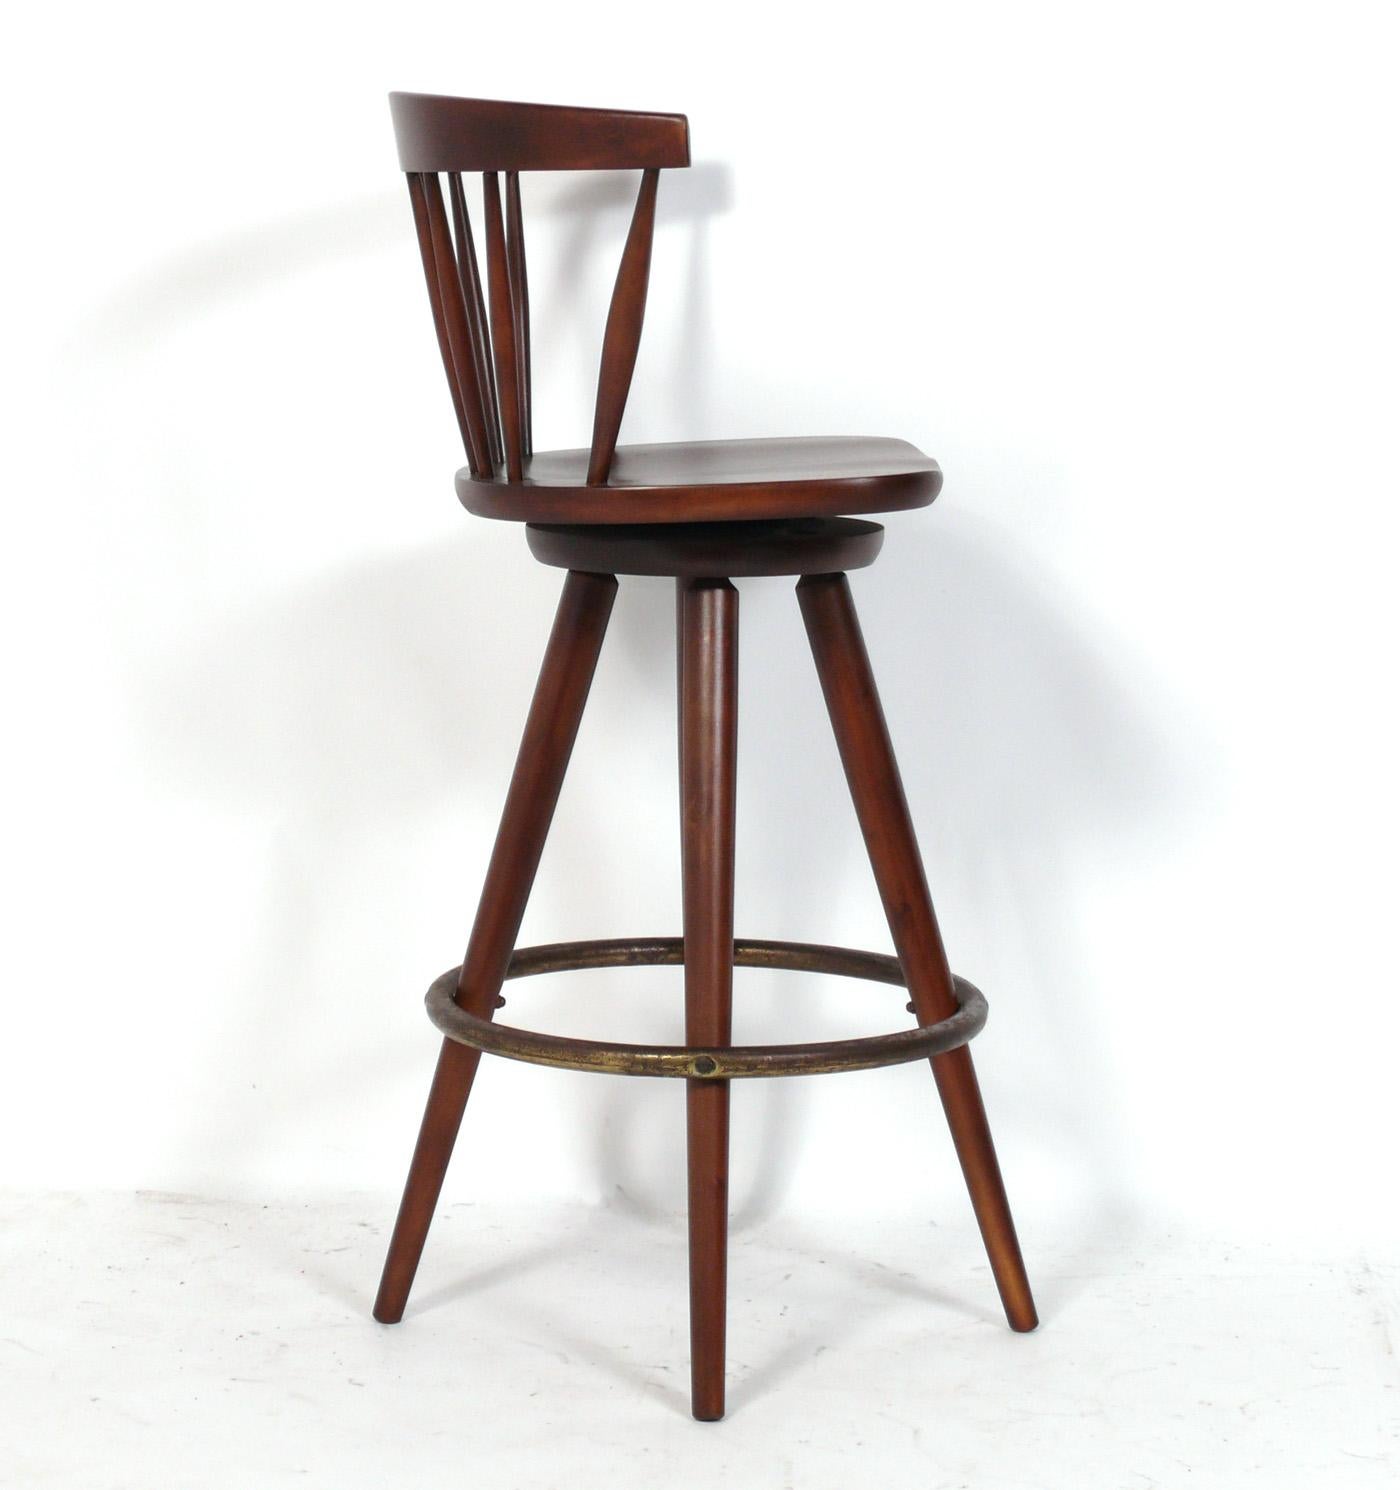 Mid-20th Century Set of Four Bar Stools in the Manner of George Nakashima For Sale